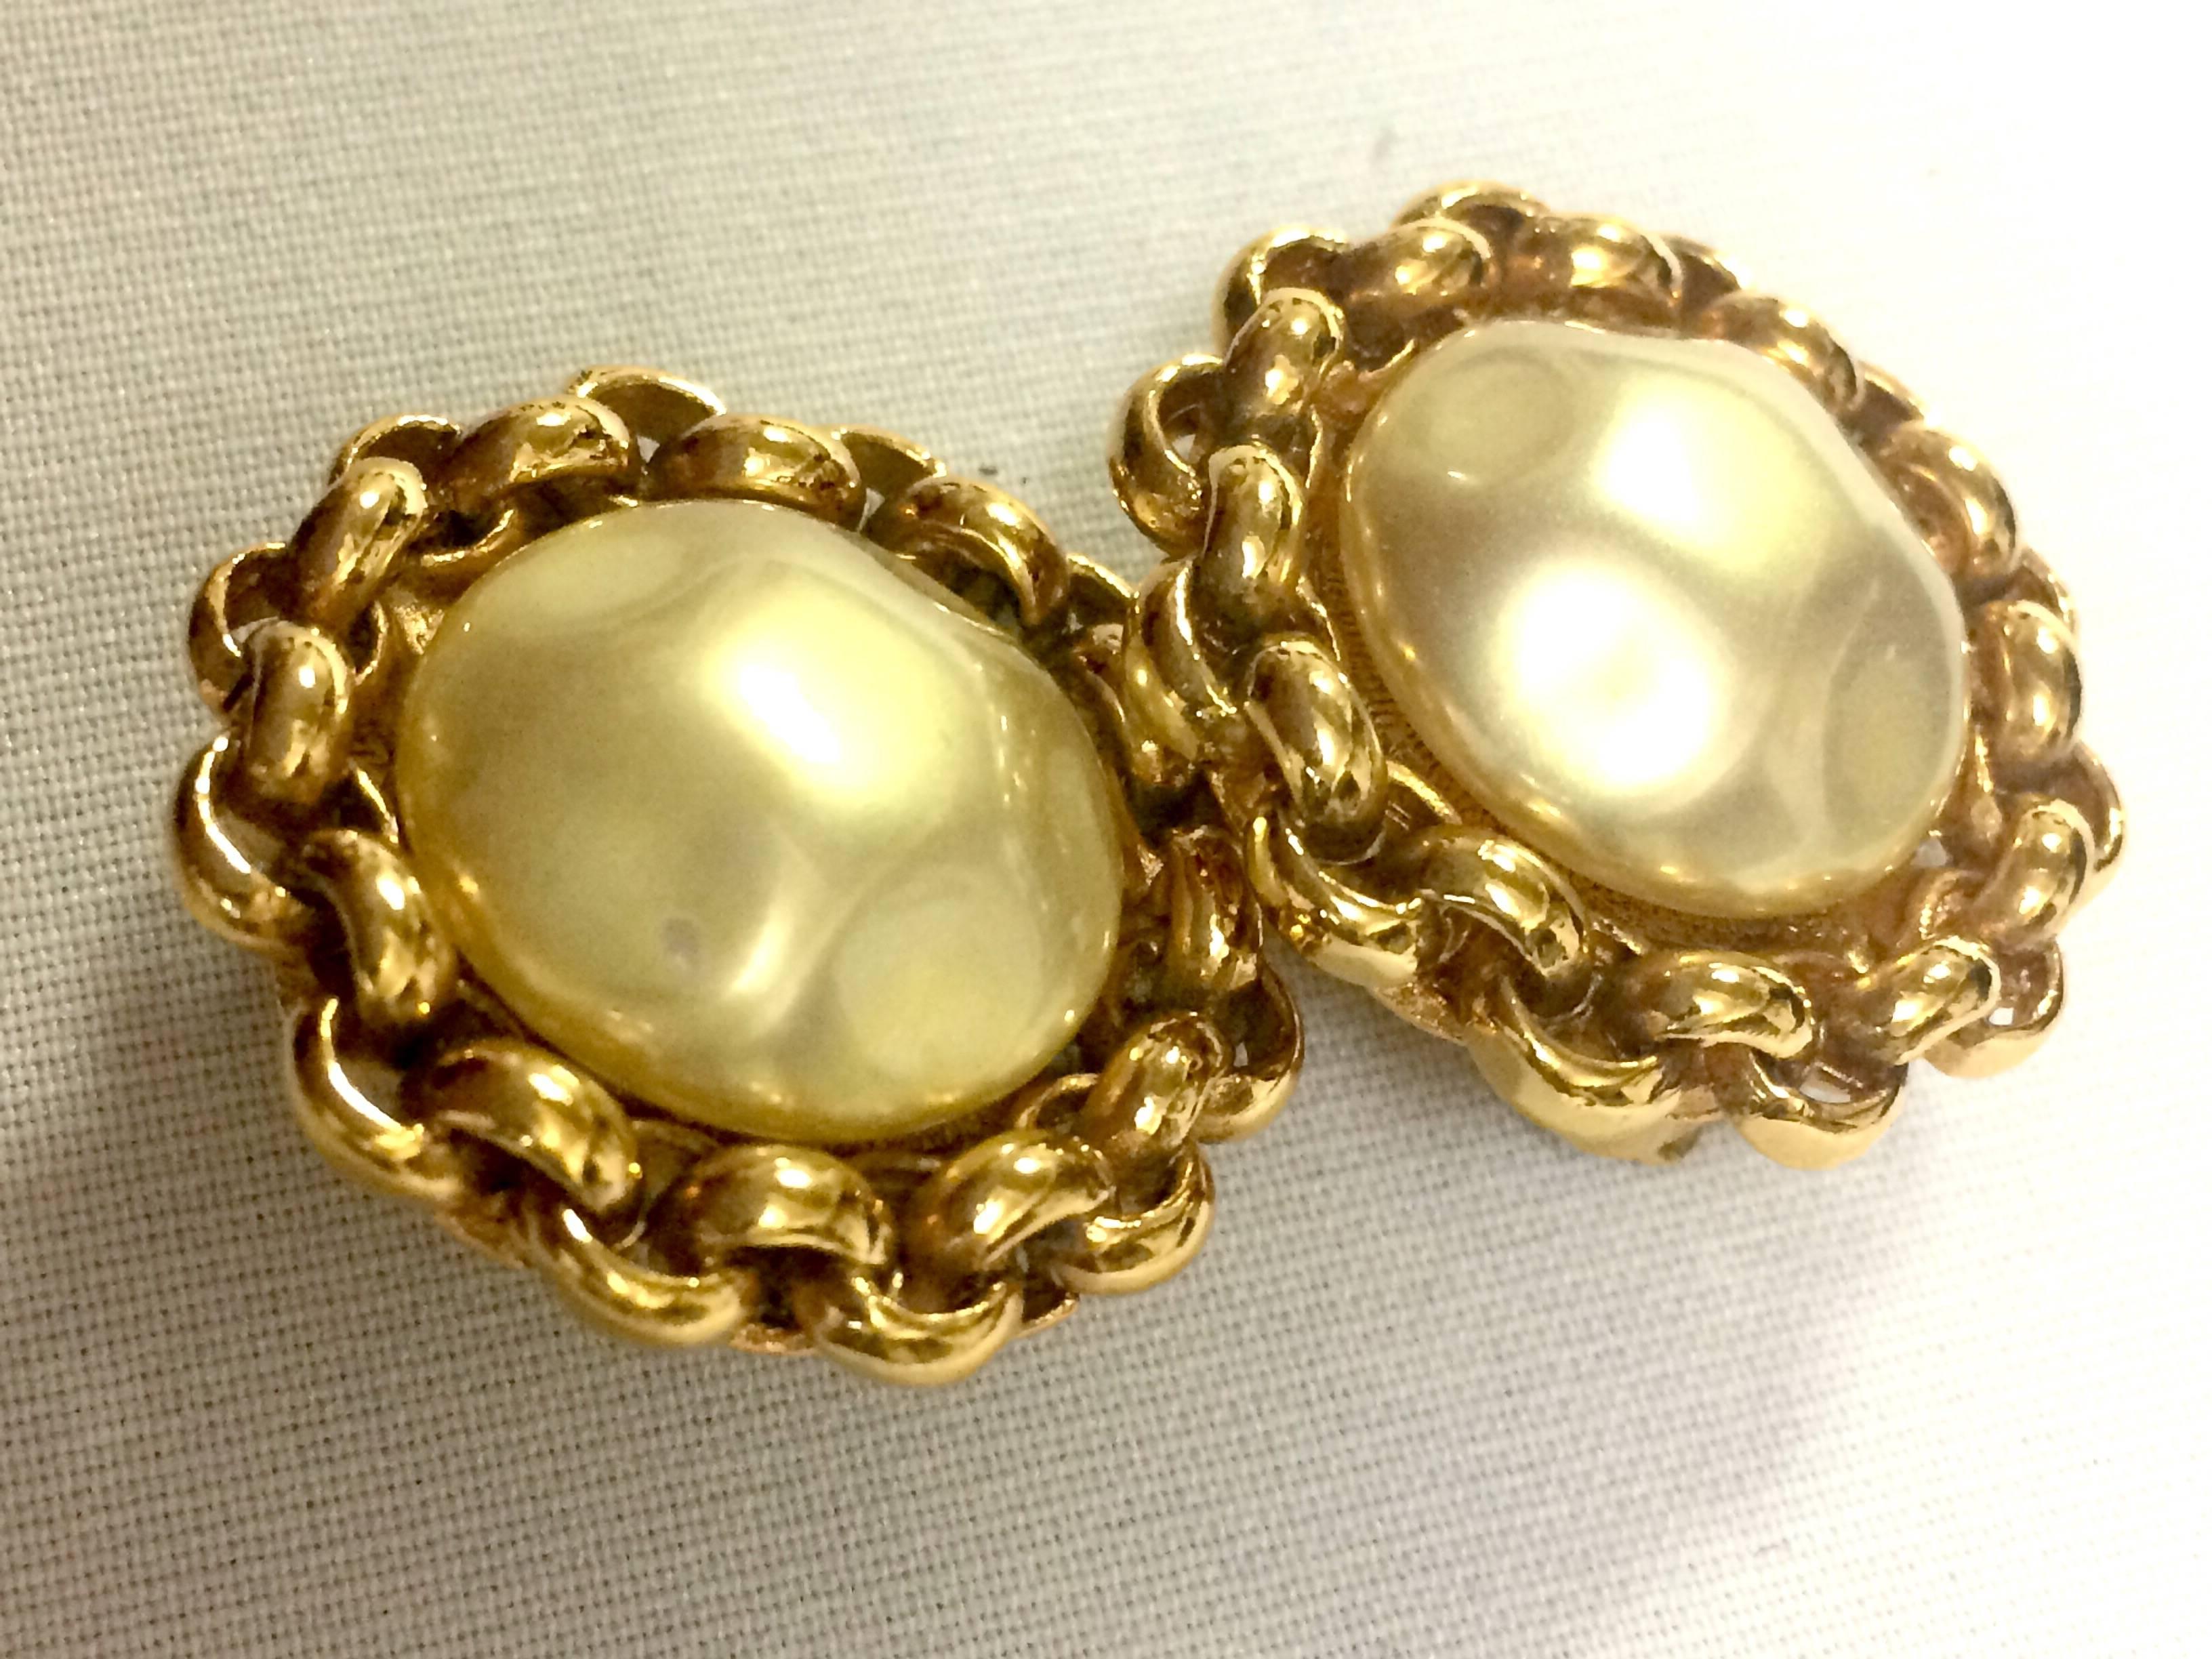 Vintage CHANEL classic simple earrings with large faux pearl and chain frames 1